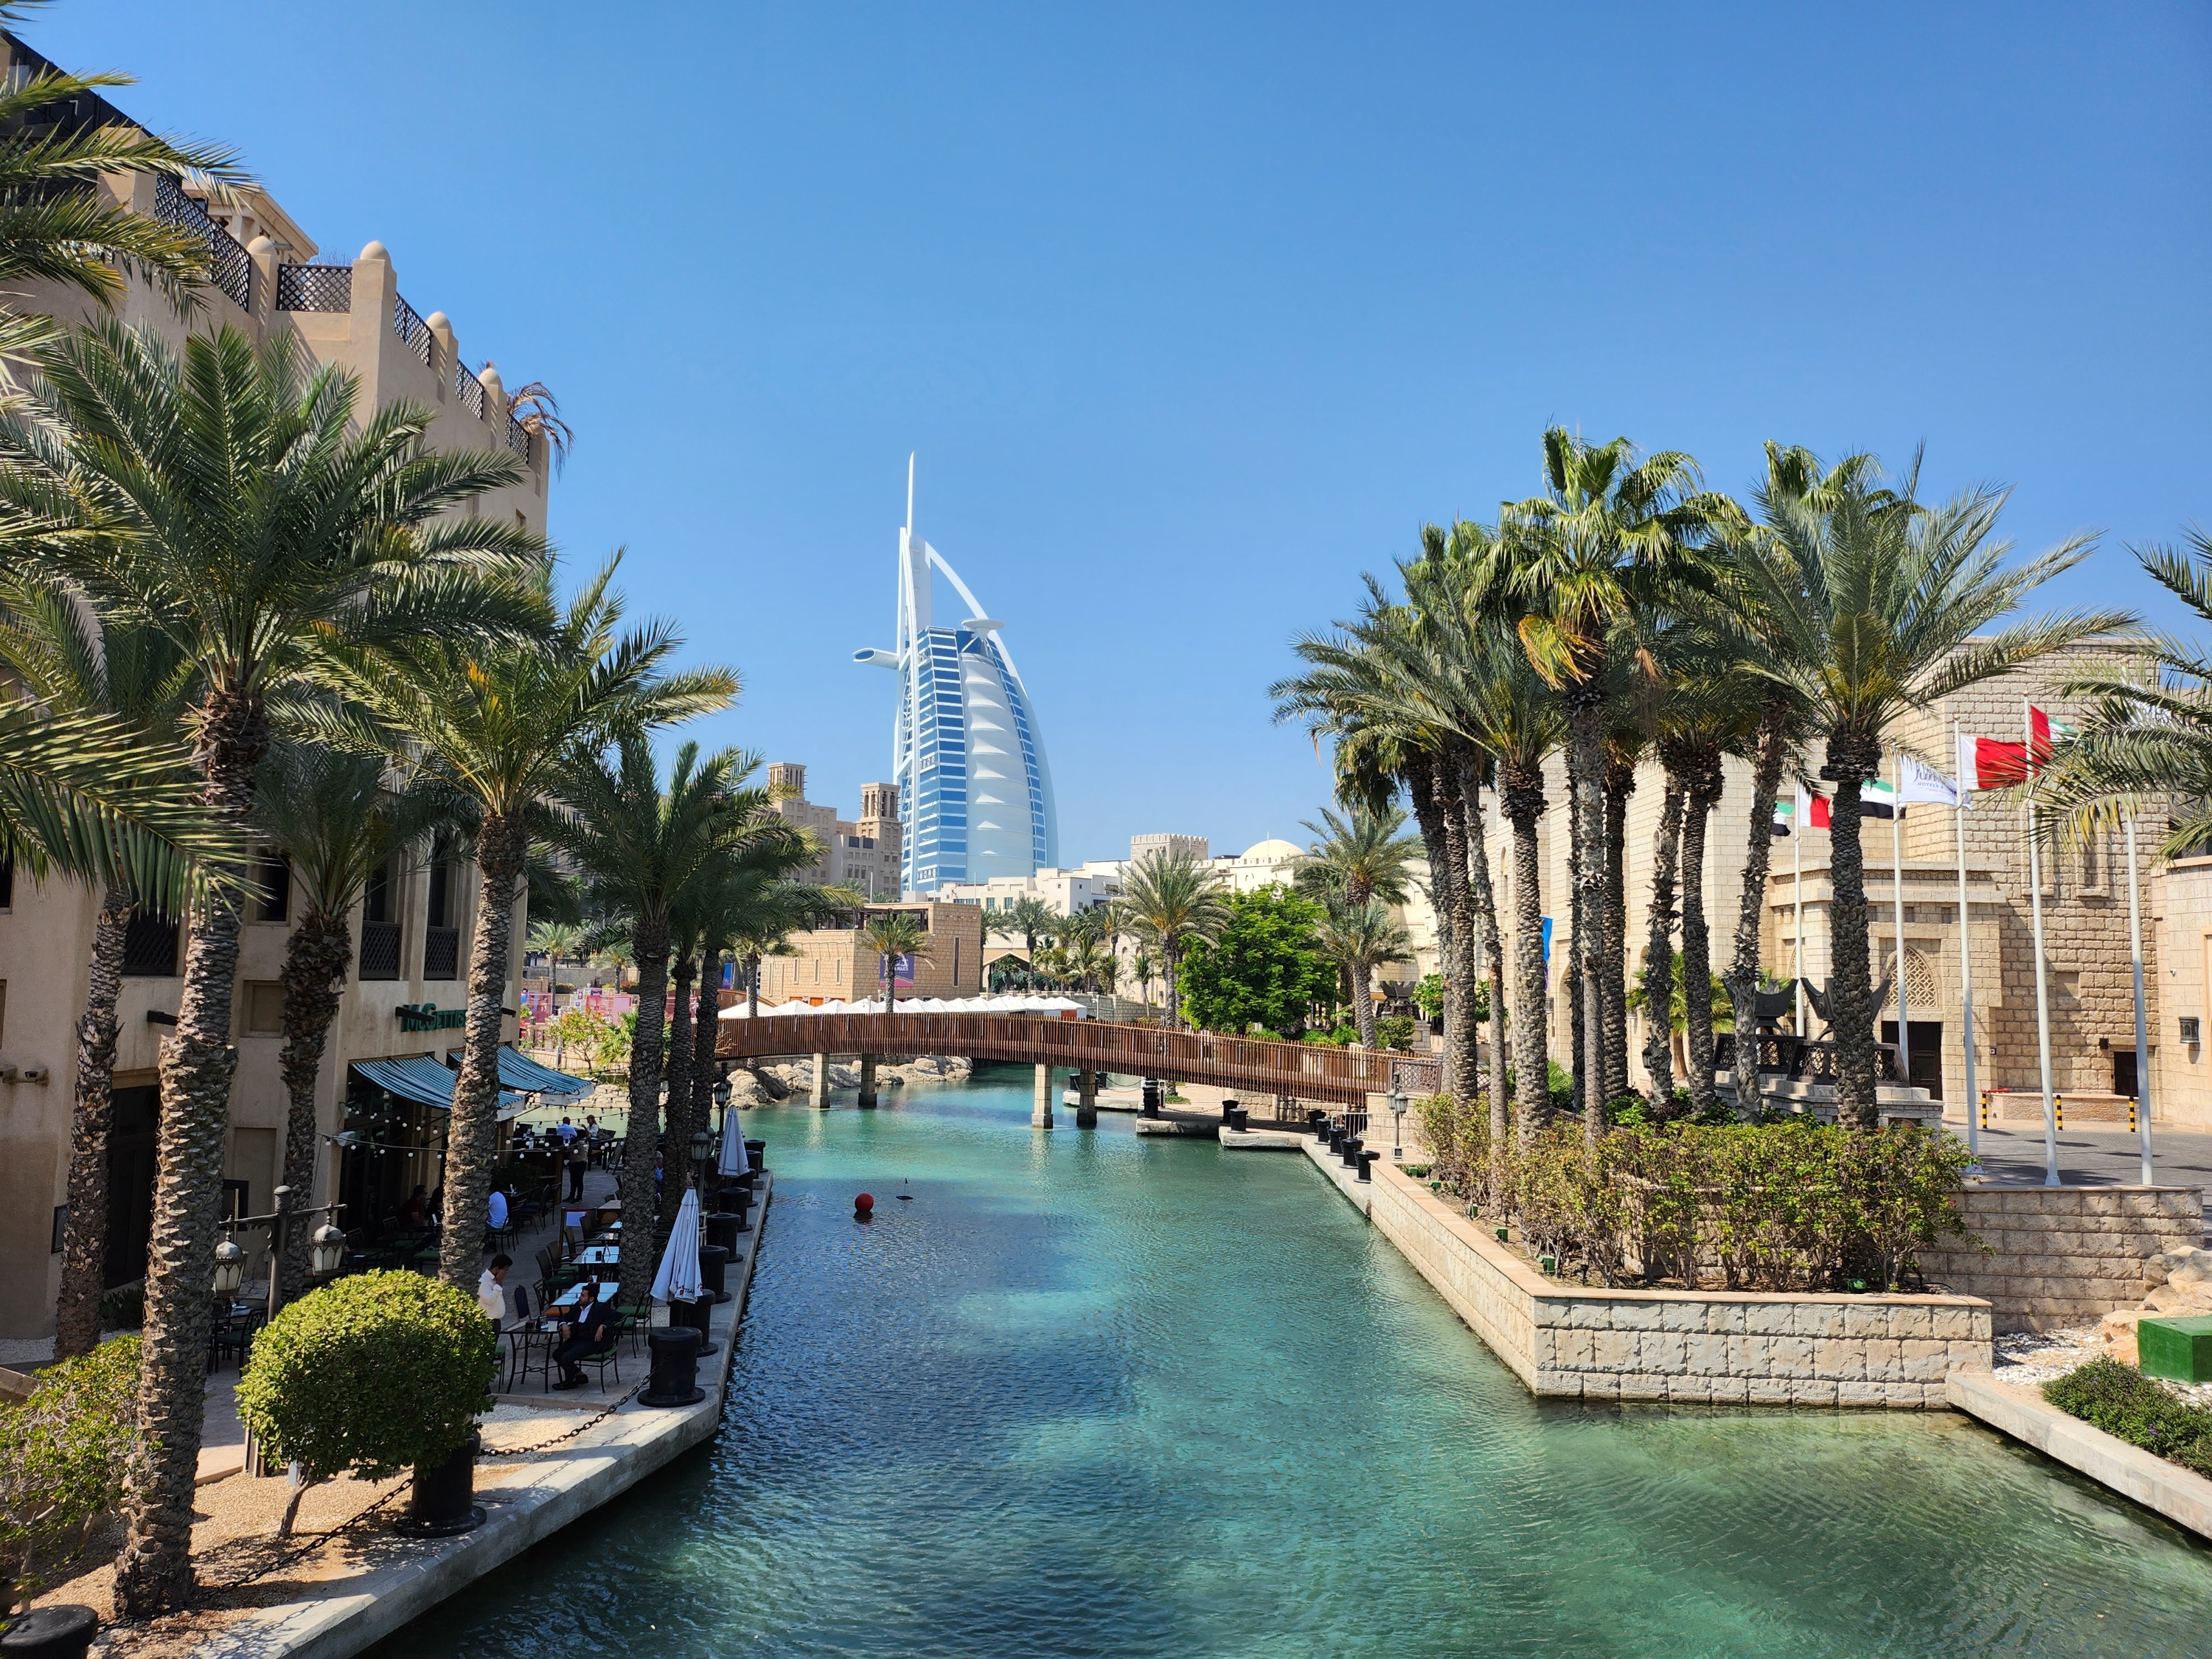 Dubai Top 20 Must-see Attractions Tour with Entry to Dubai Frame